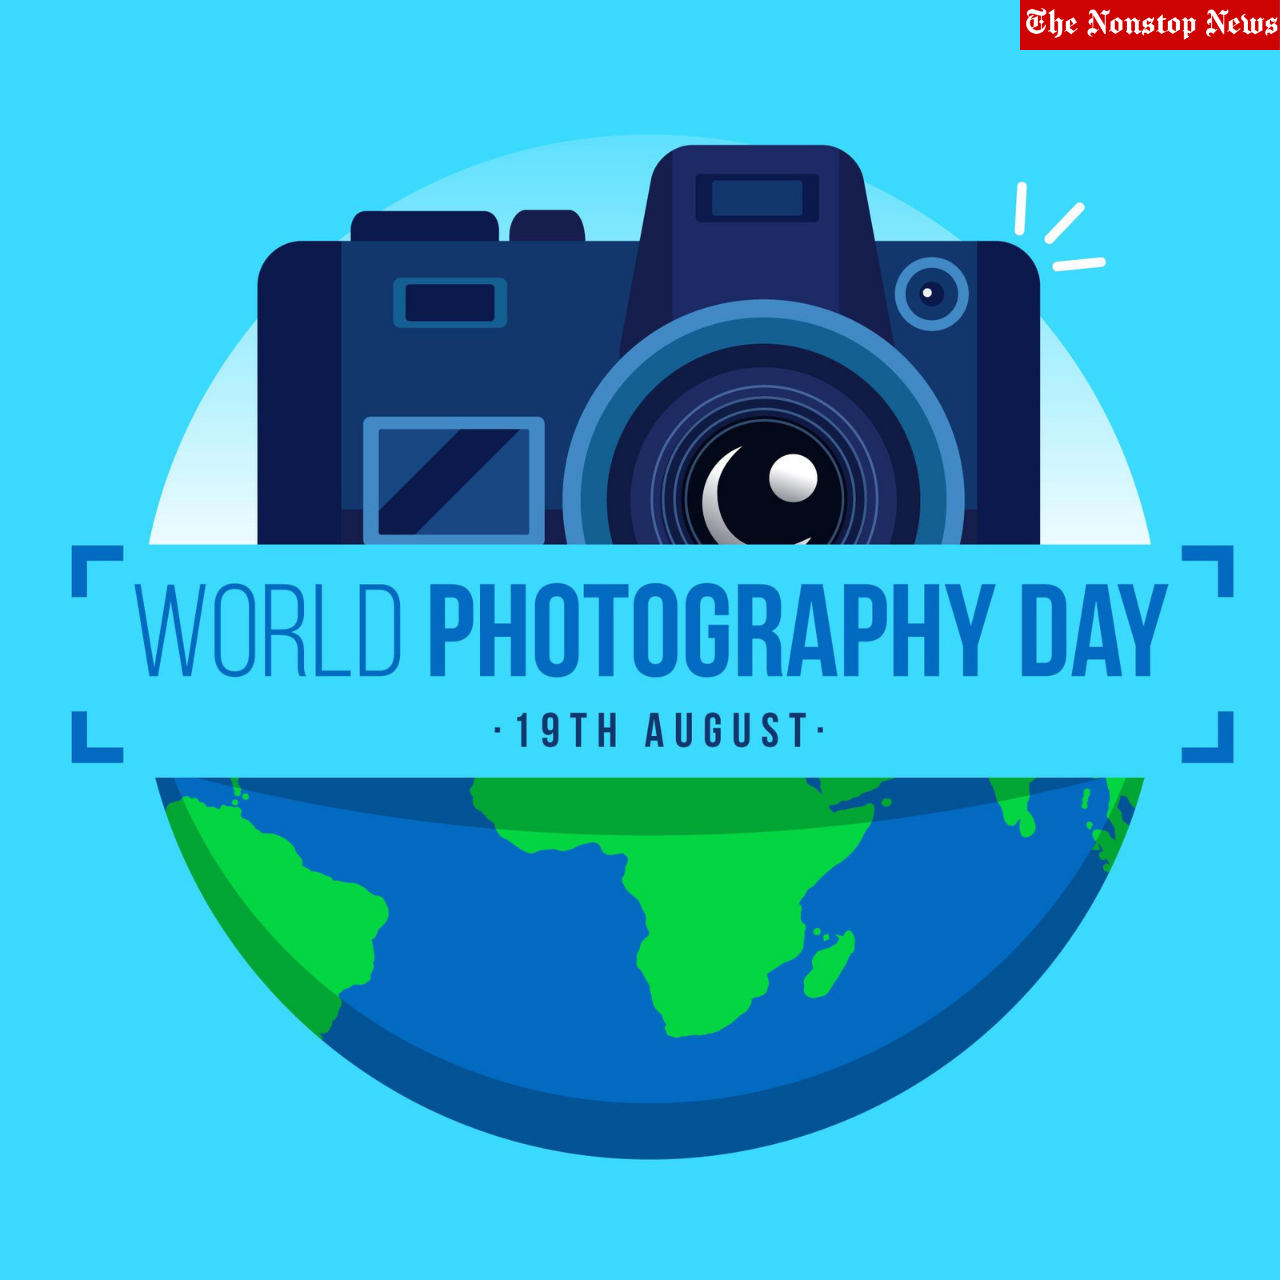 World Photography Day 2021 Theme, Quotes, HD Images, Poster, Wishes, and WhatsApp Status to greet your any loved one